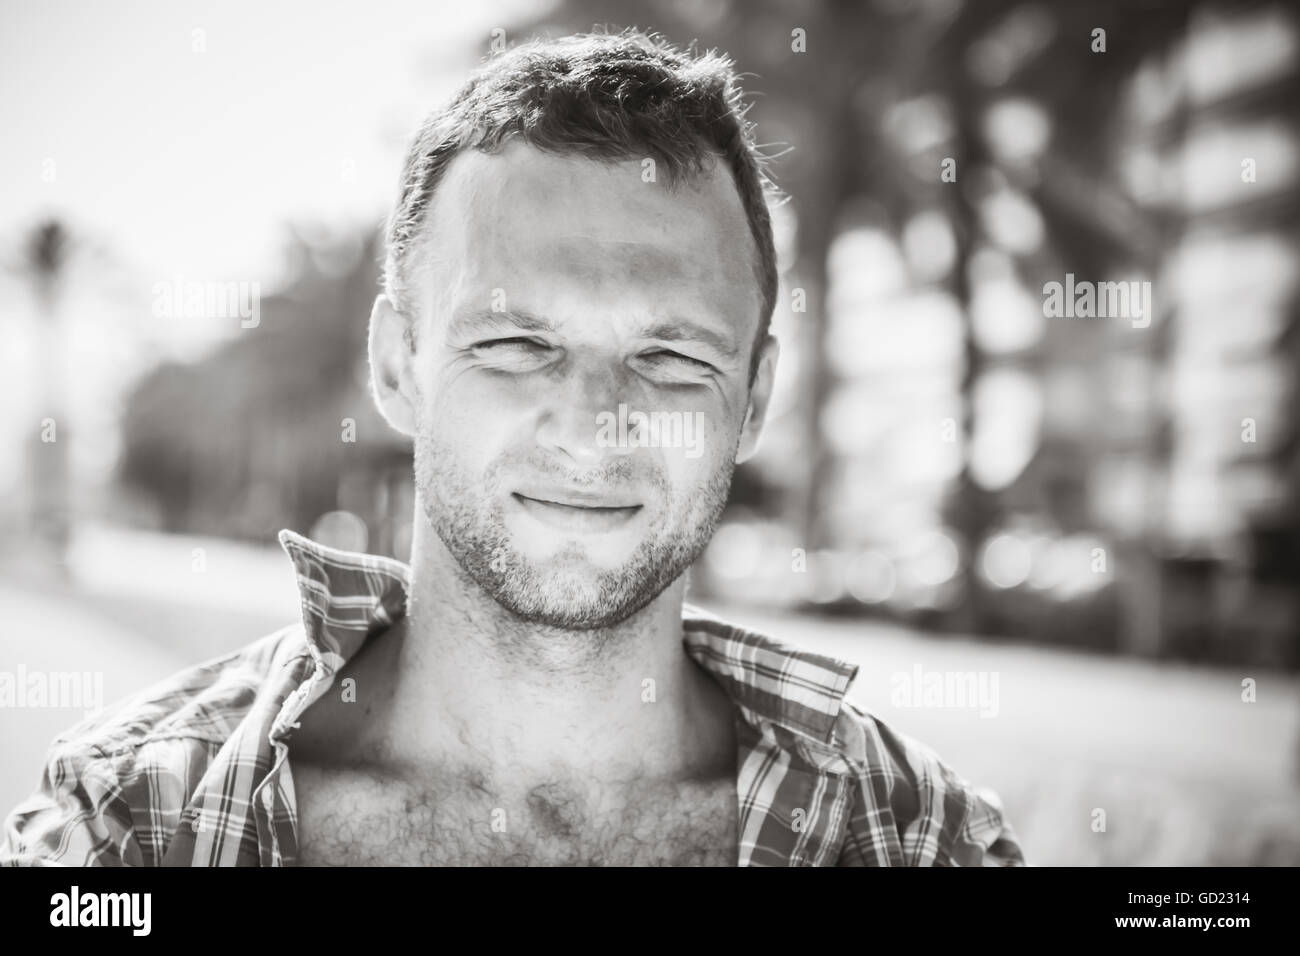 Smiling young handsome Caucasian man, outdoor portrait in sunny day, black and white stylized photo Stock Photo